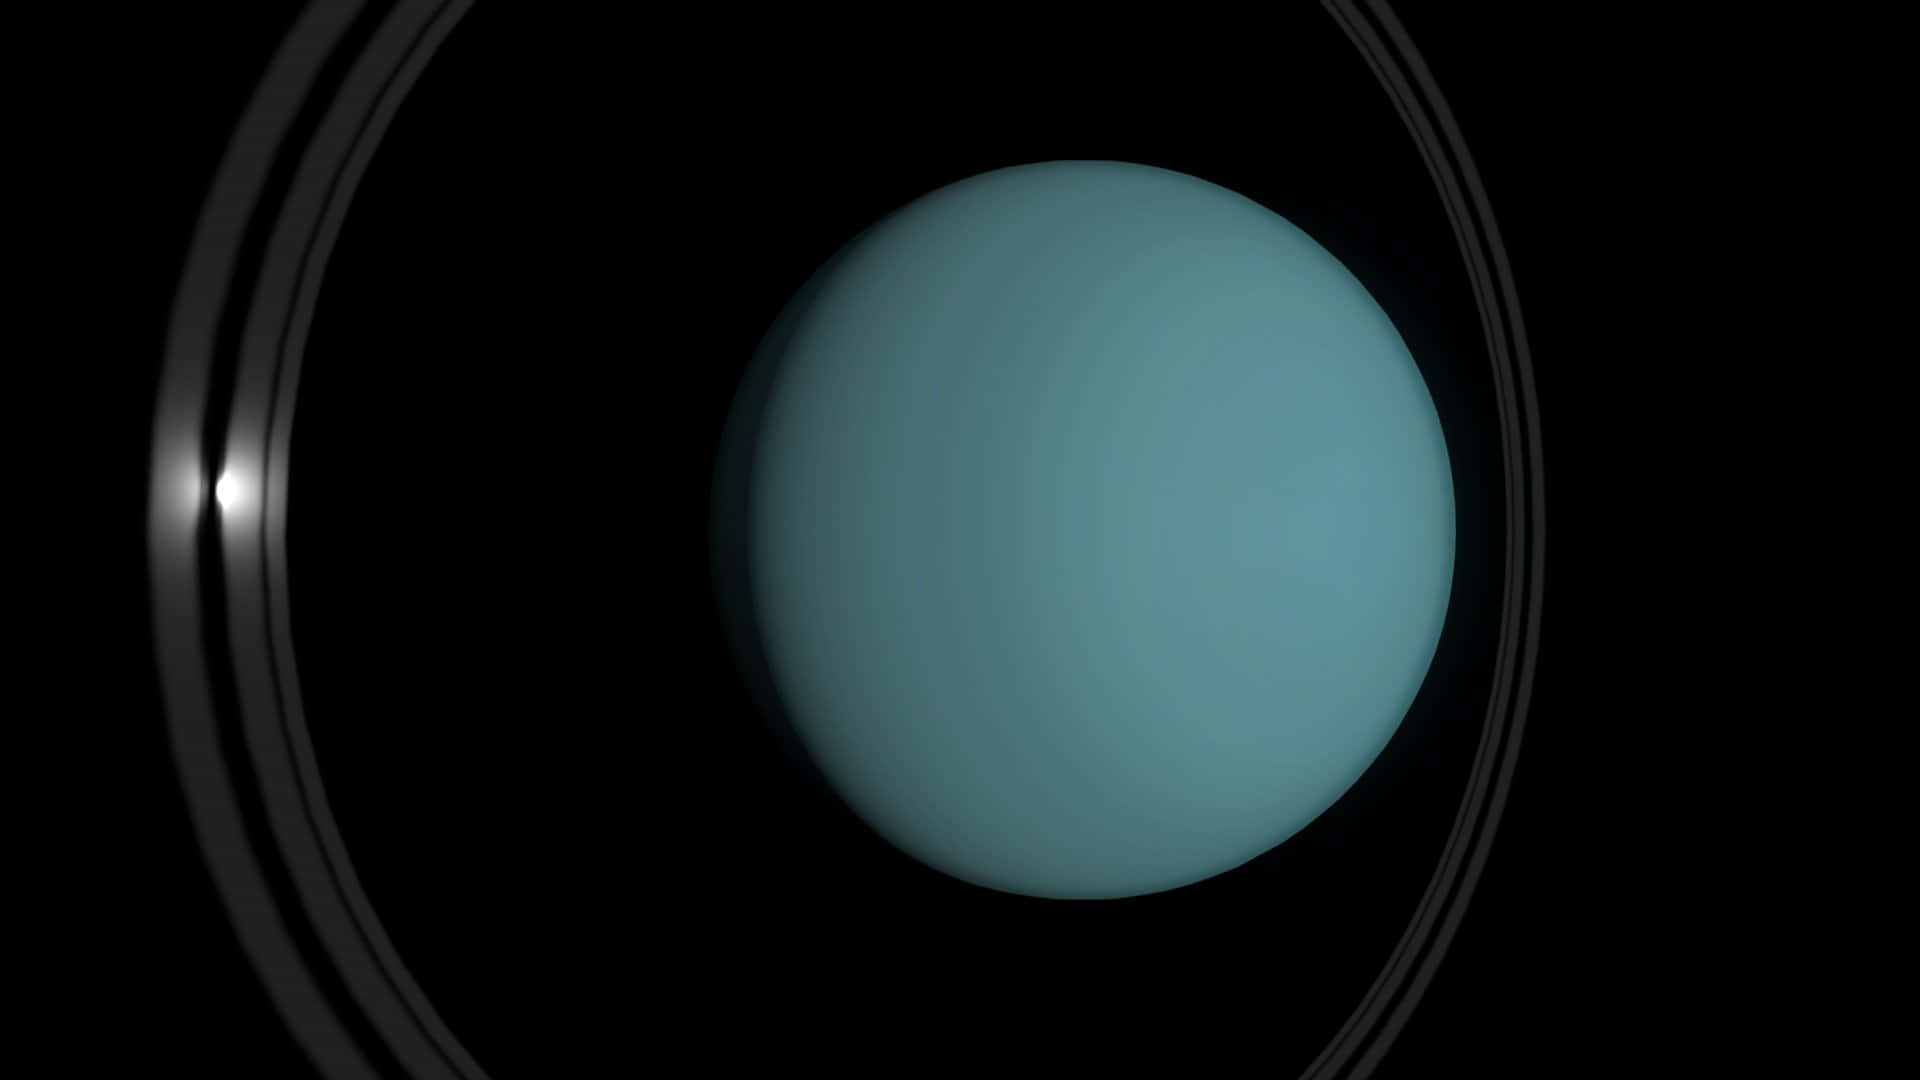 The icy blue hues of Uranus are displayed beneath the starry sky.